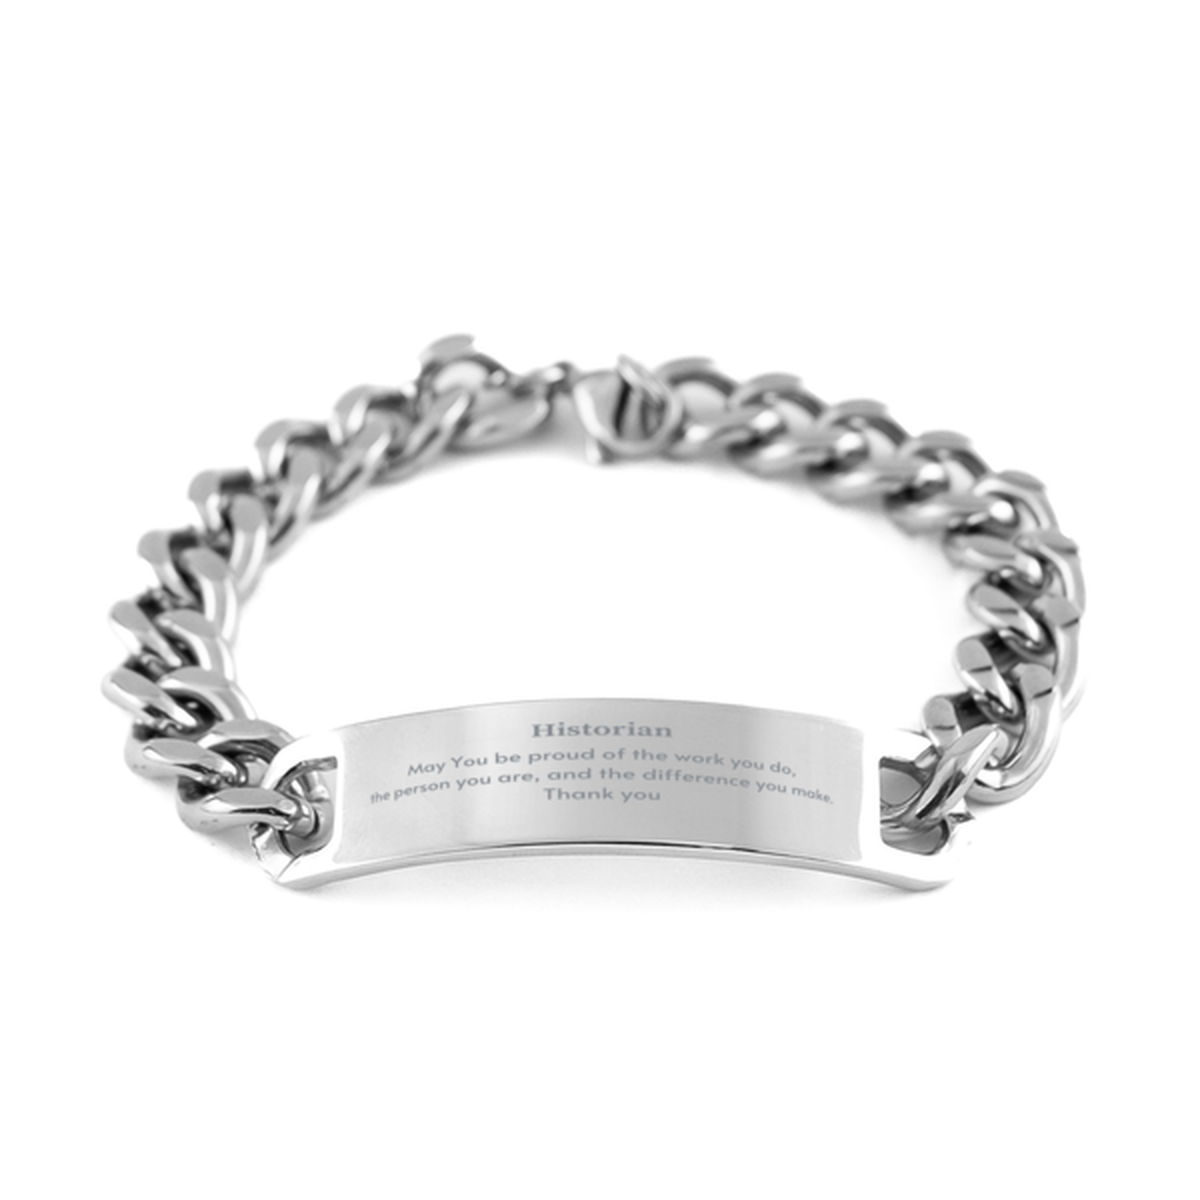 Heartwarming Cuban Chain Stainless Steel Bracelet Retirement Coworkers Gifts for Historian, Historian May You be proud of the work you do, the person you are Gifts for Boss Men Women Friends